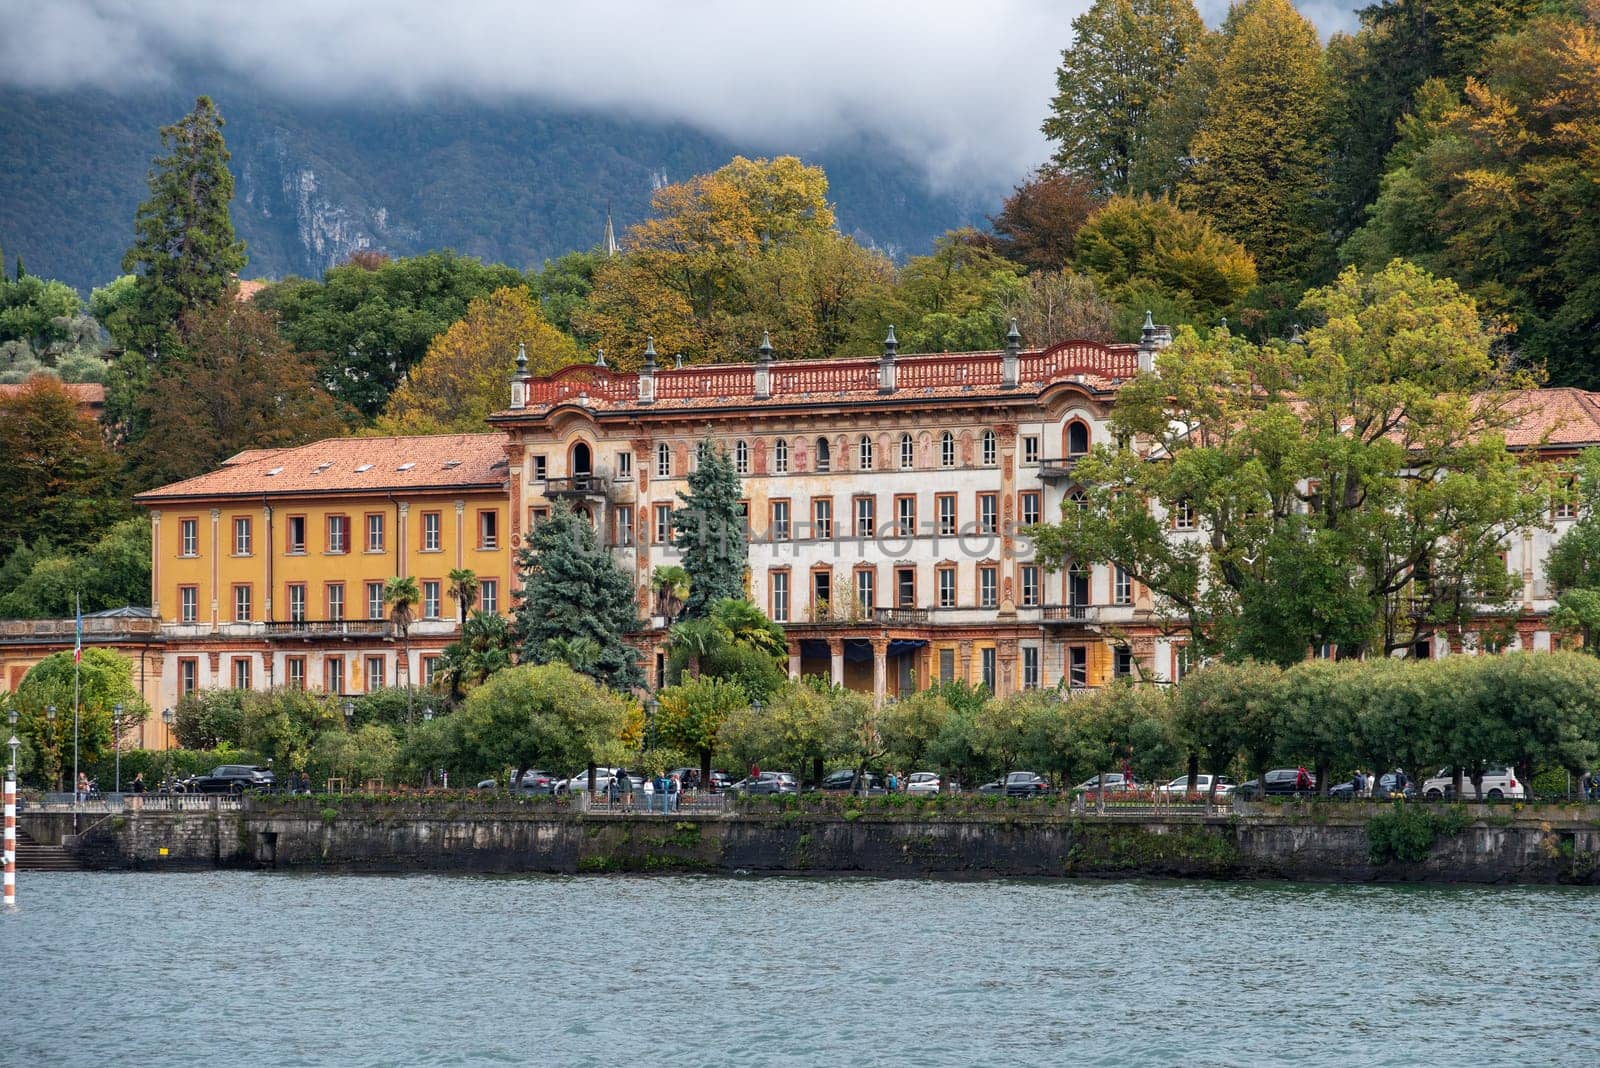 Ruin of an old hotel palace in Bellagio at lake Como, Italy